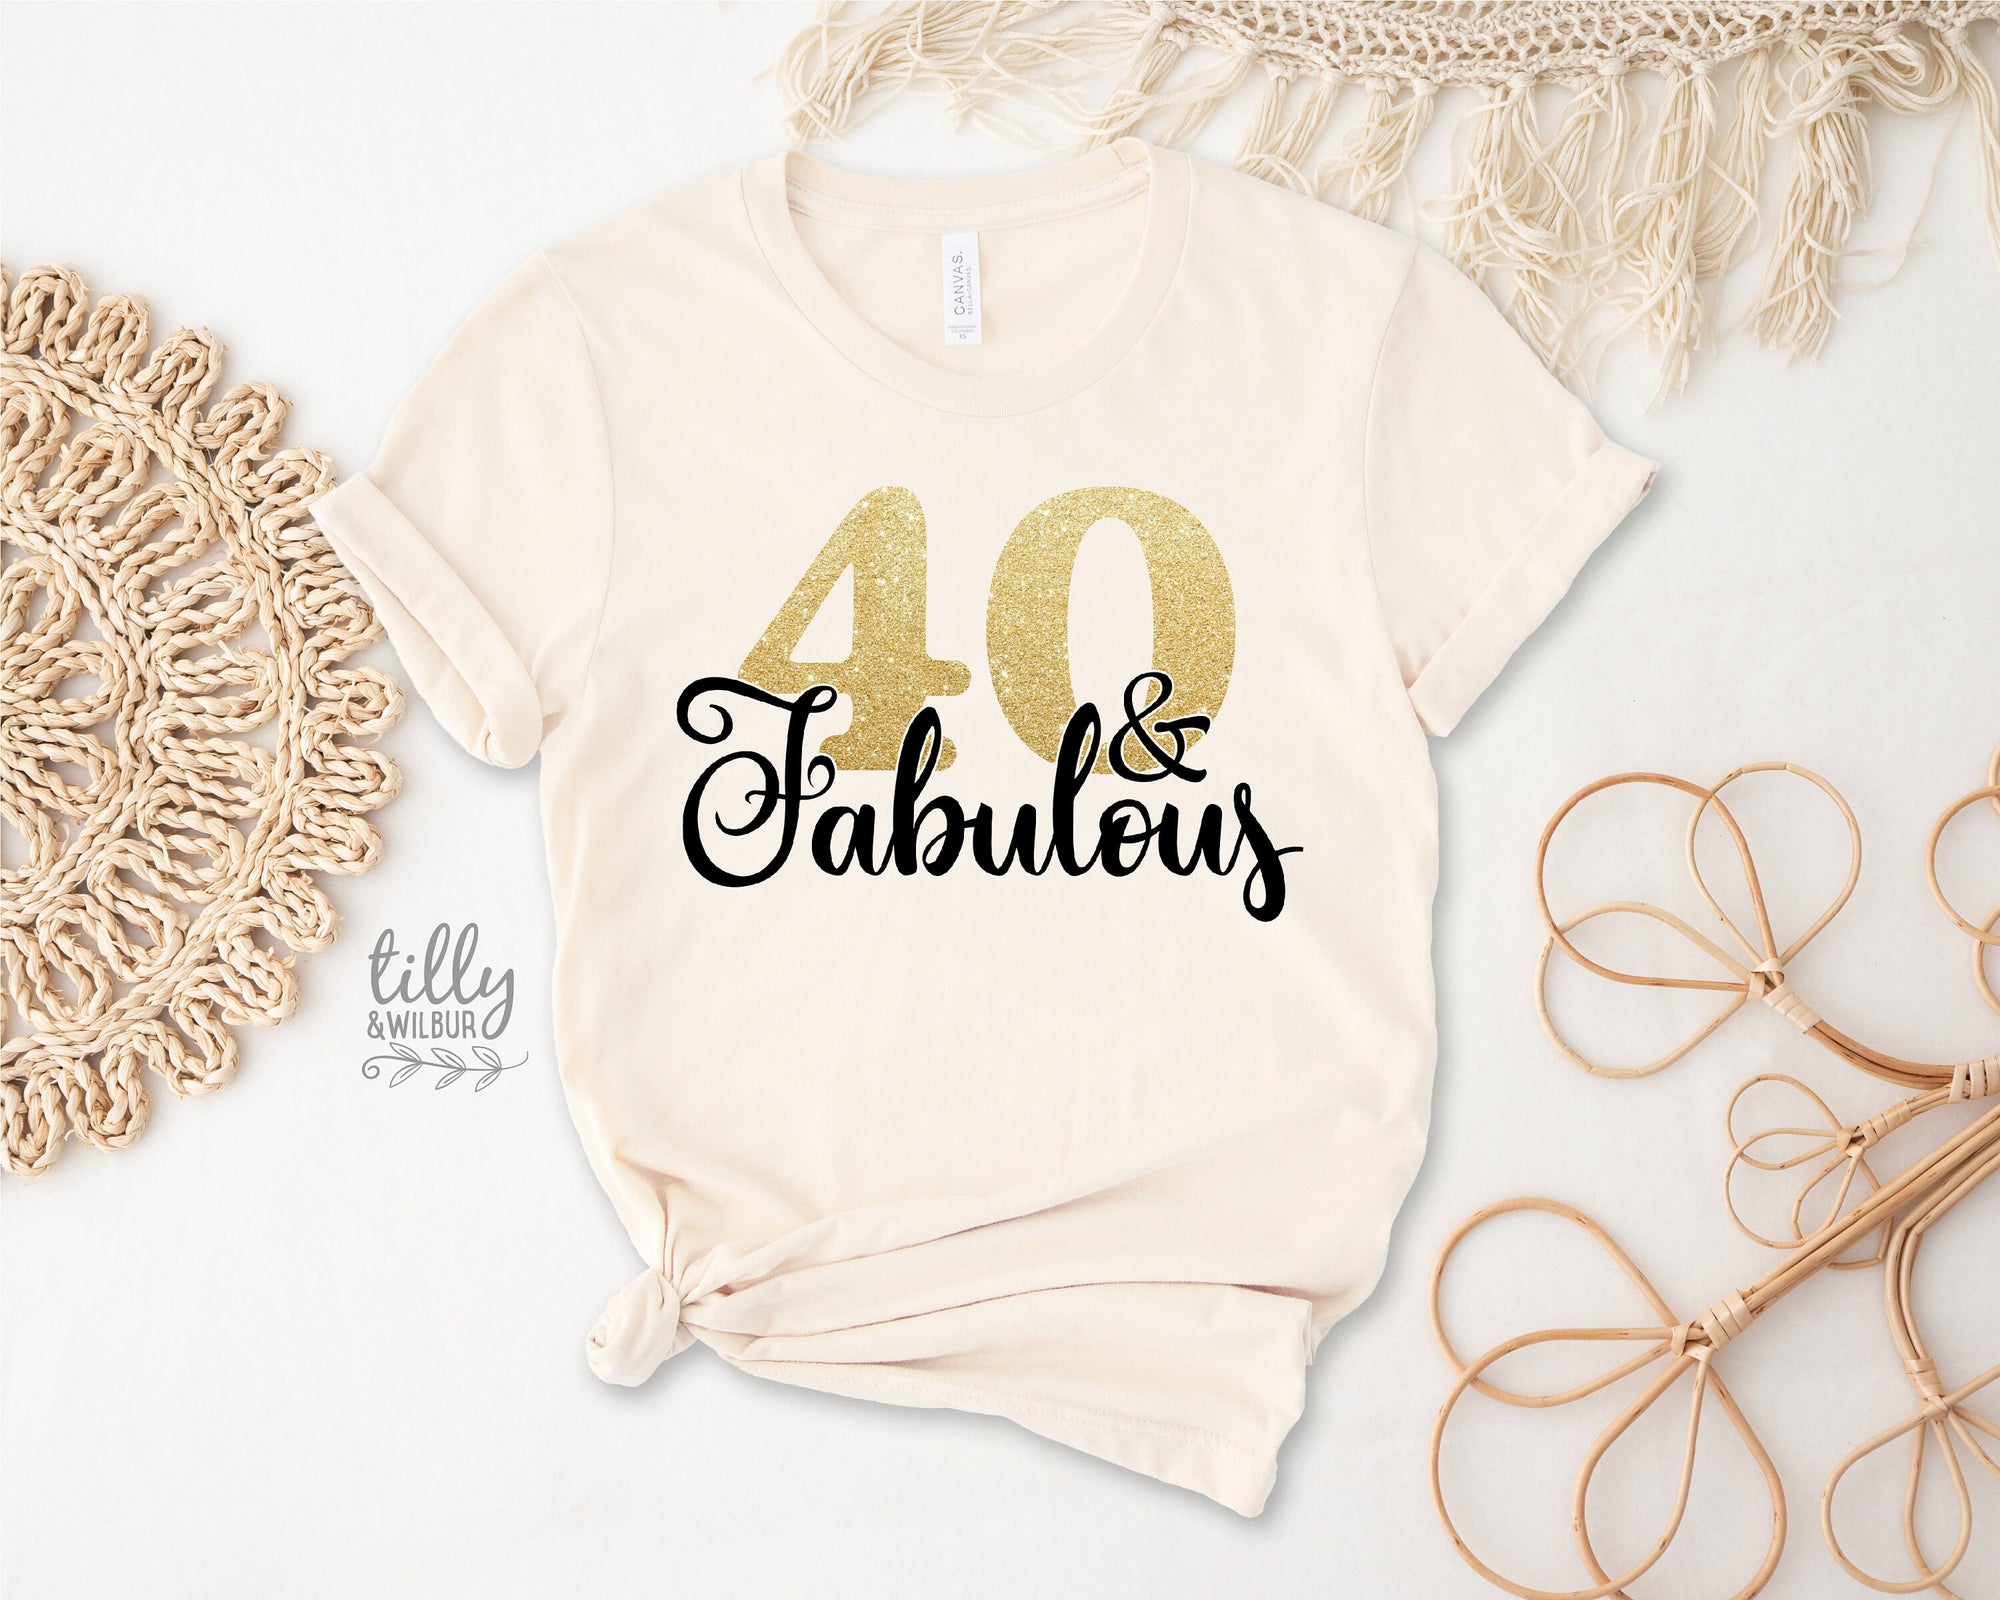 40 And Fabulous T-Shirt, Forty And Fabulous T-Shirt, Women's 40th Birthday T-Shirt, Women's 40th Birthday Gift, Fortieth T-Shirt, Fortieth